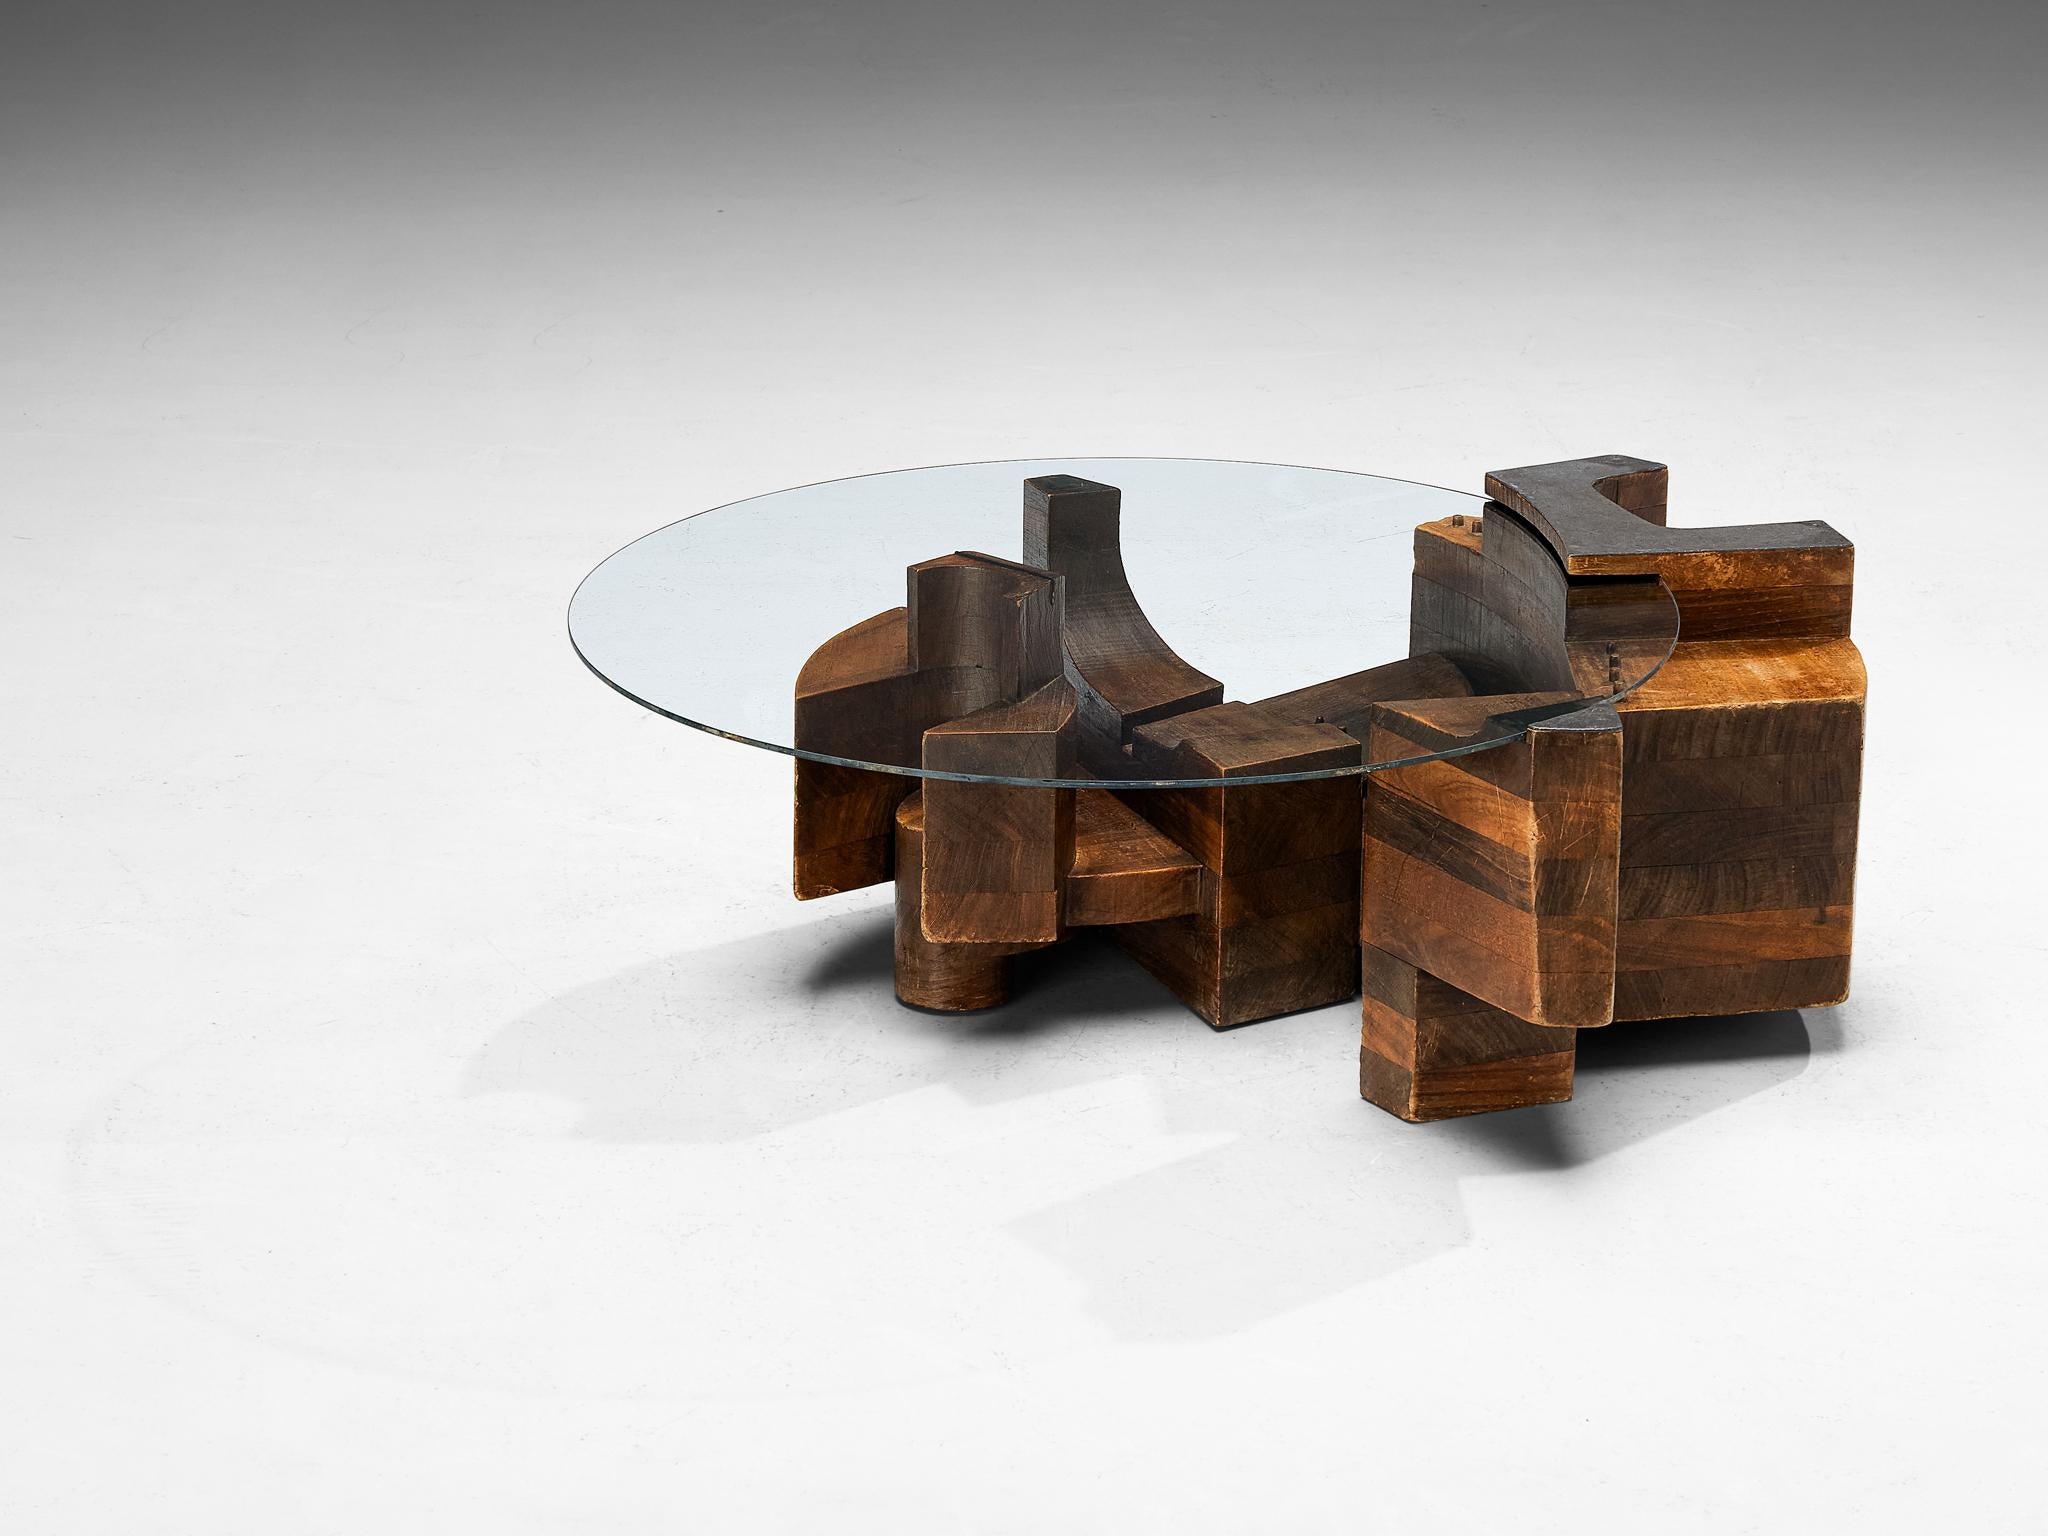 Nerone & Patuzzi for Gruppo NP2, coffee table, wood, glass, iron, Italy, 1970s

Designed by the Italian duo Nerone and Patuzzi, this unique coffee table is certainly a work of art in its own right. The base consists of an asymmetrical layout of